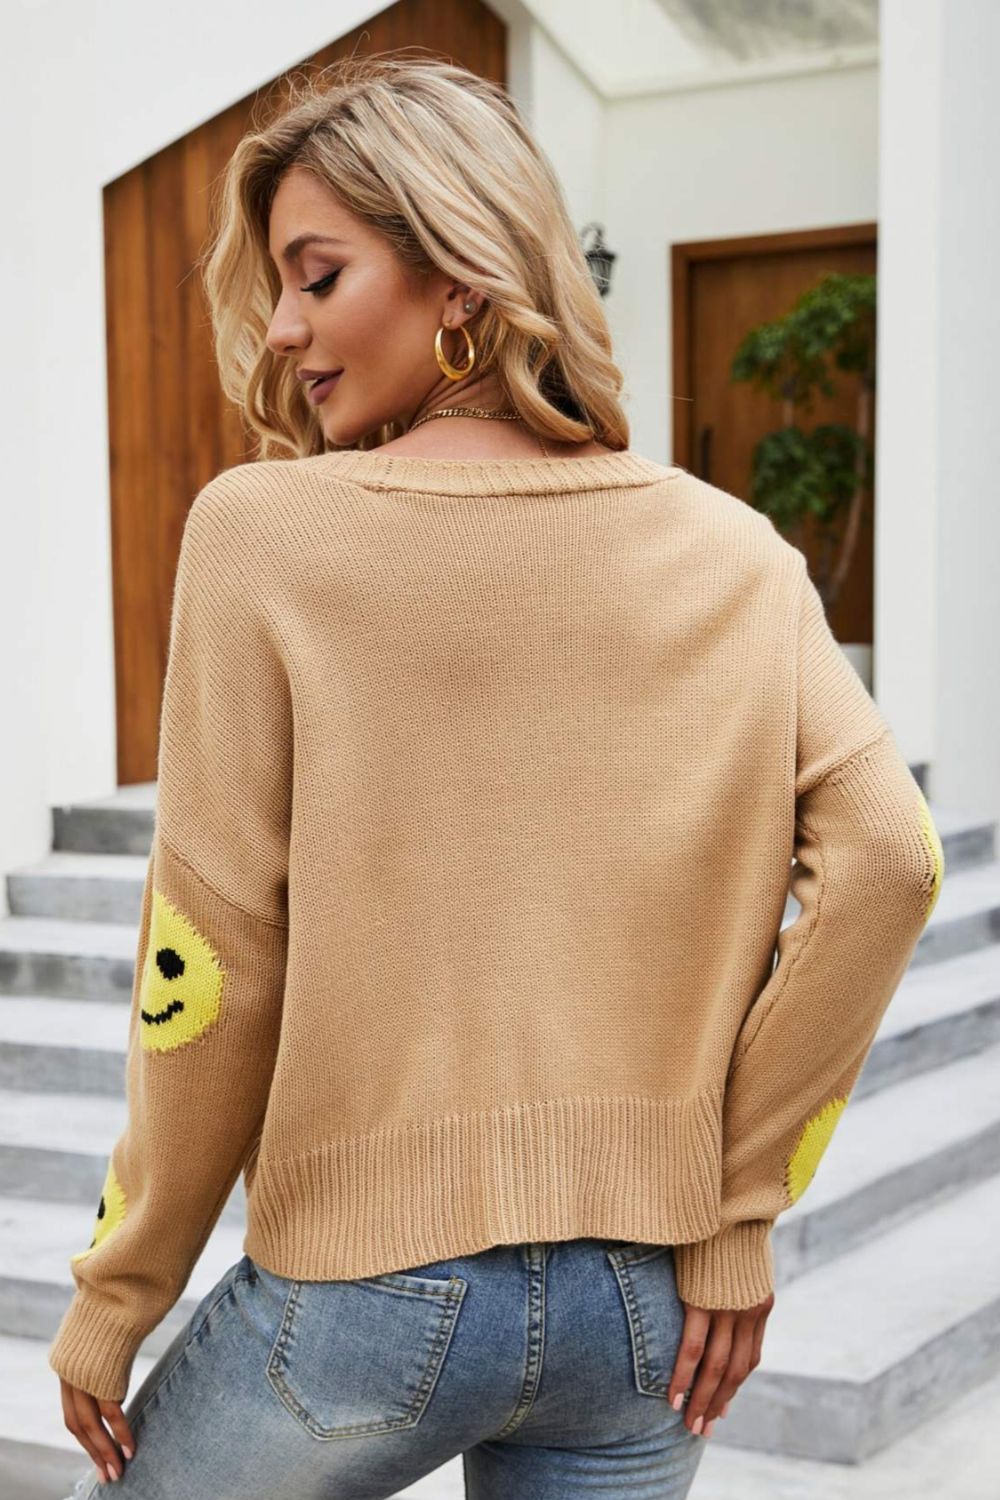 Smiley Face Ribbed Trim V-Neck Cardigan - Women’s Clothing & Accessories - Shirts & Tops - 7 - 2024